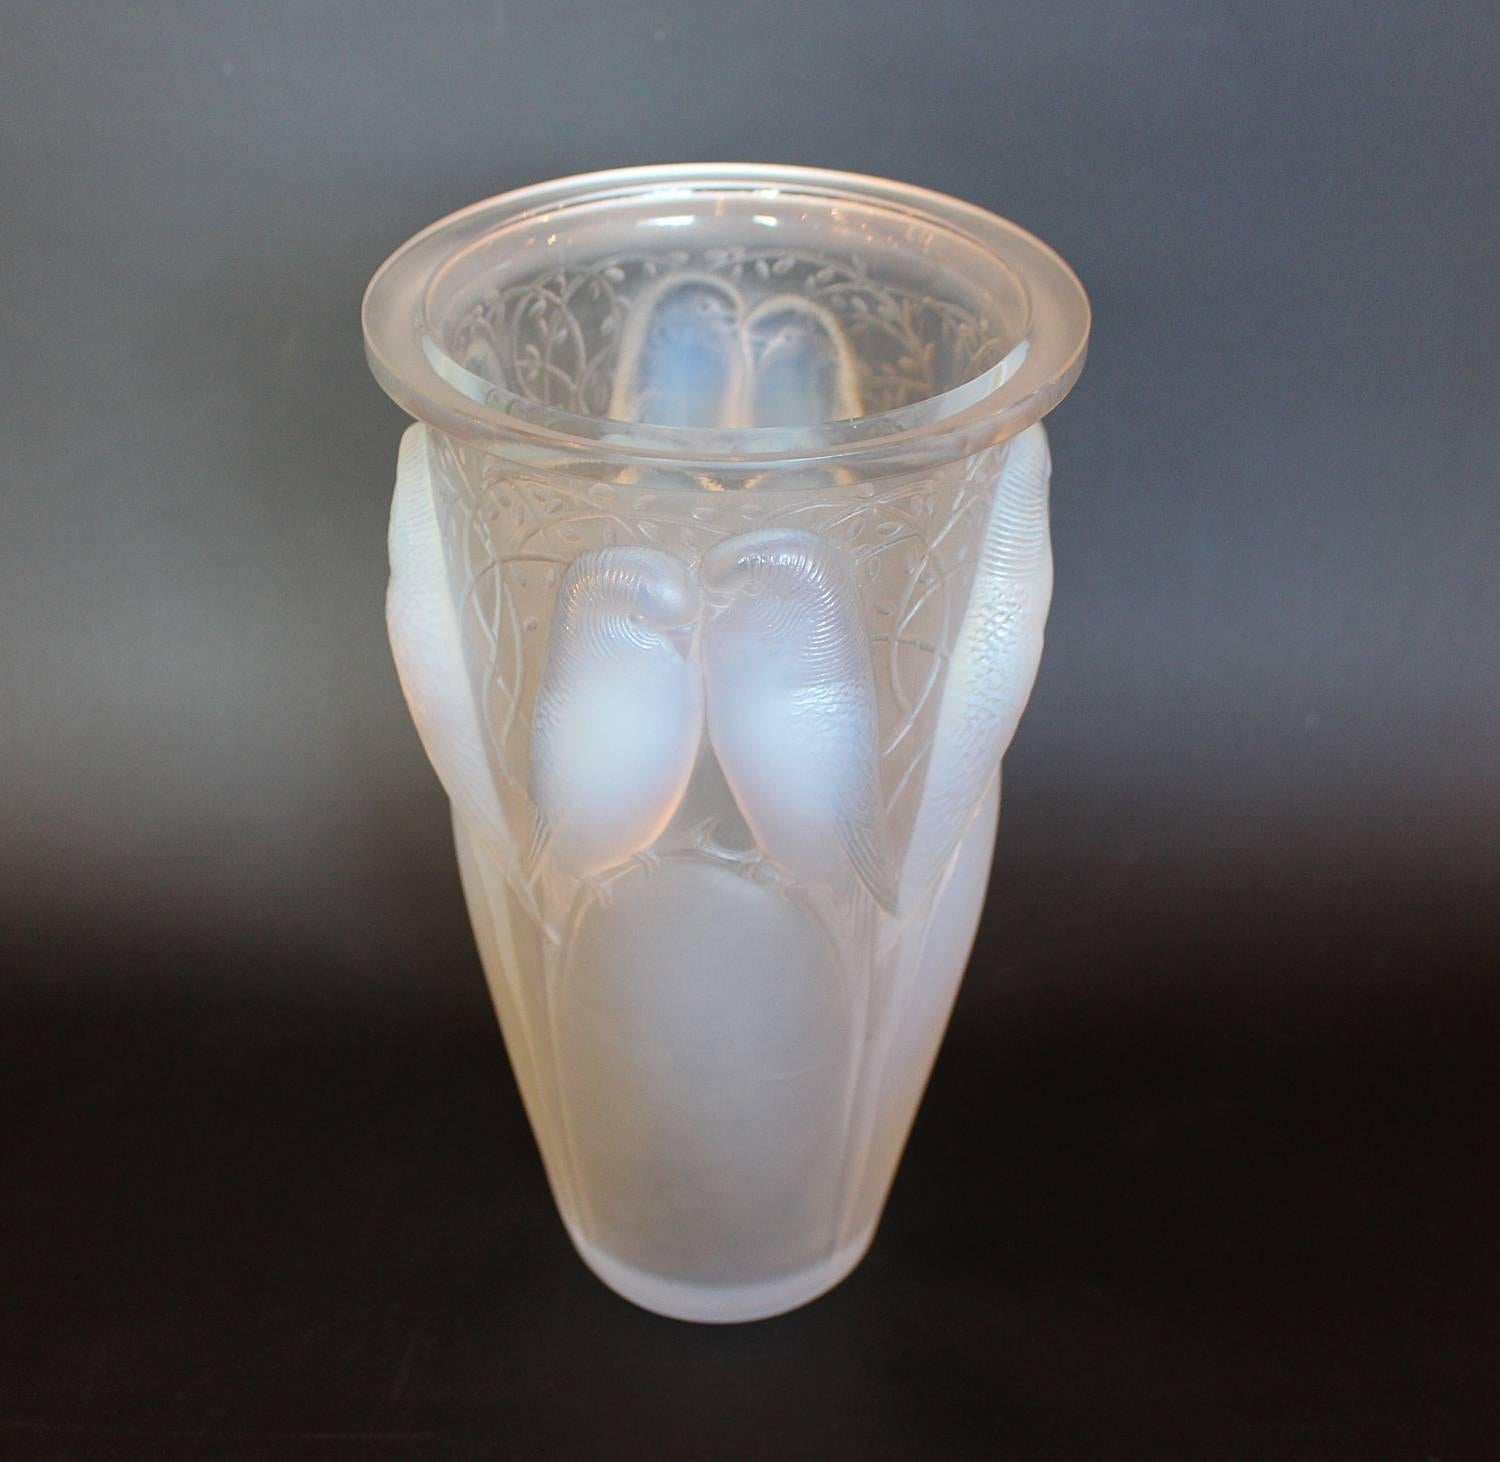 Ceylan, an Art Deco glass vase by Rene Lalique (1860-1945). A frosted and opalescent glass vase, relief decorated with pairs of lovebirds and vines.

Etched R Lalique France and number 905 to underside.

Literature: Marcilhac, R Lalique